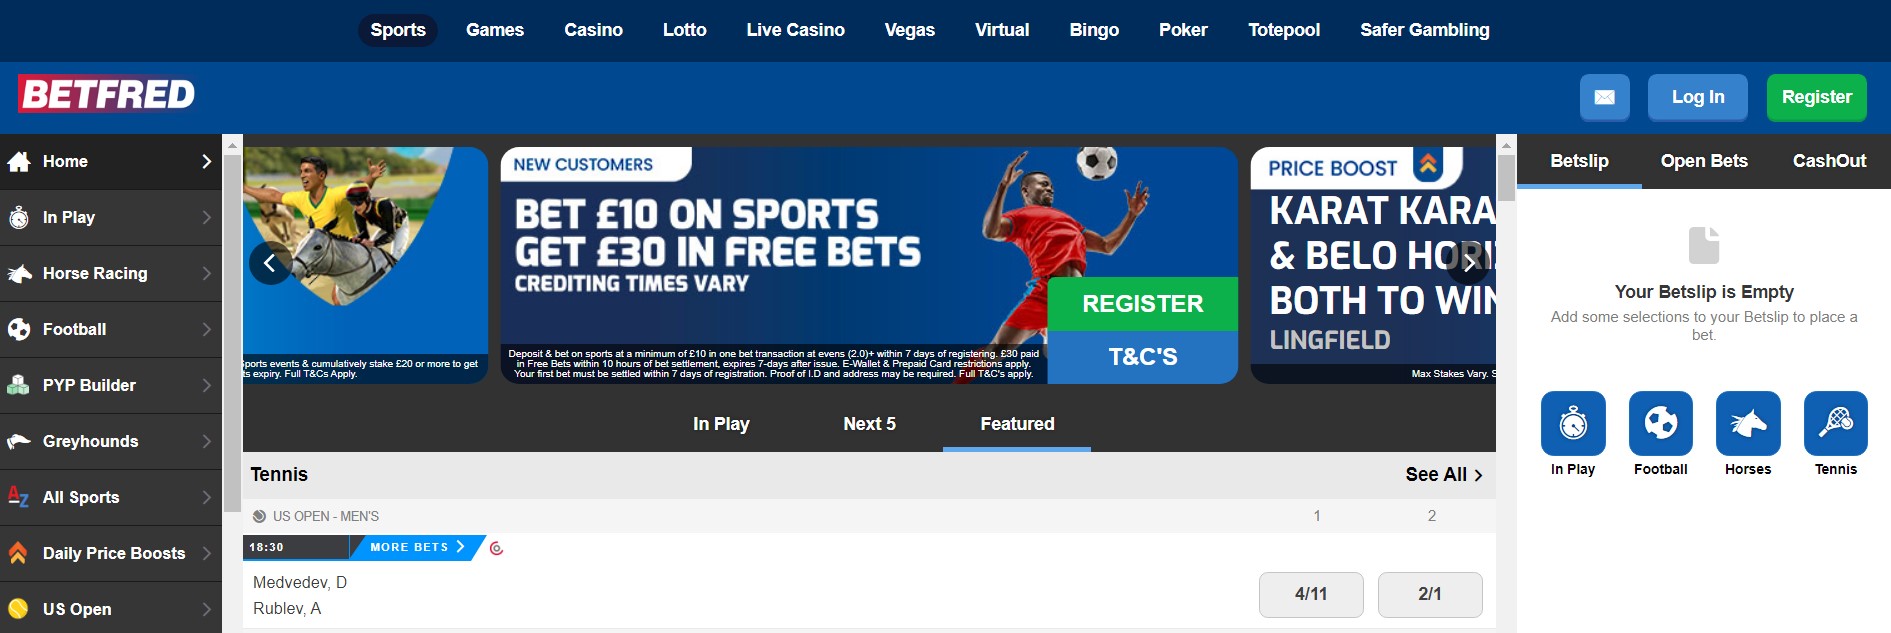 Betfred Site Offers